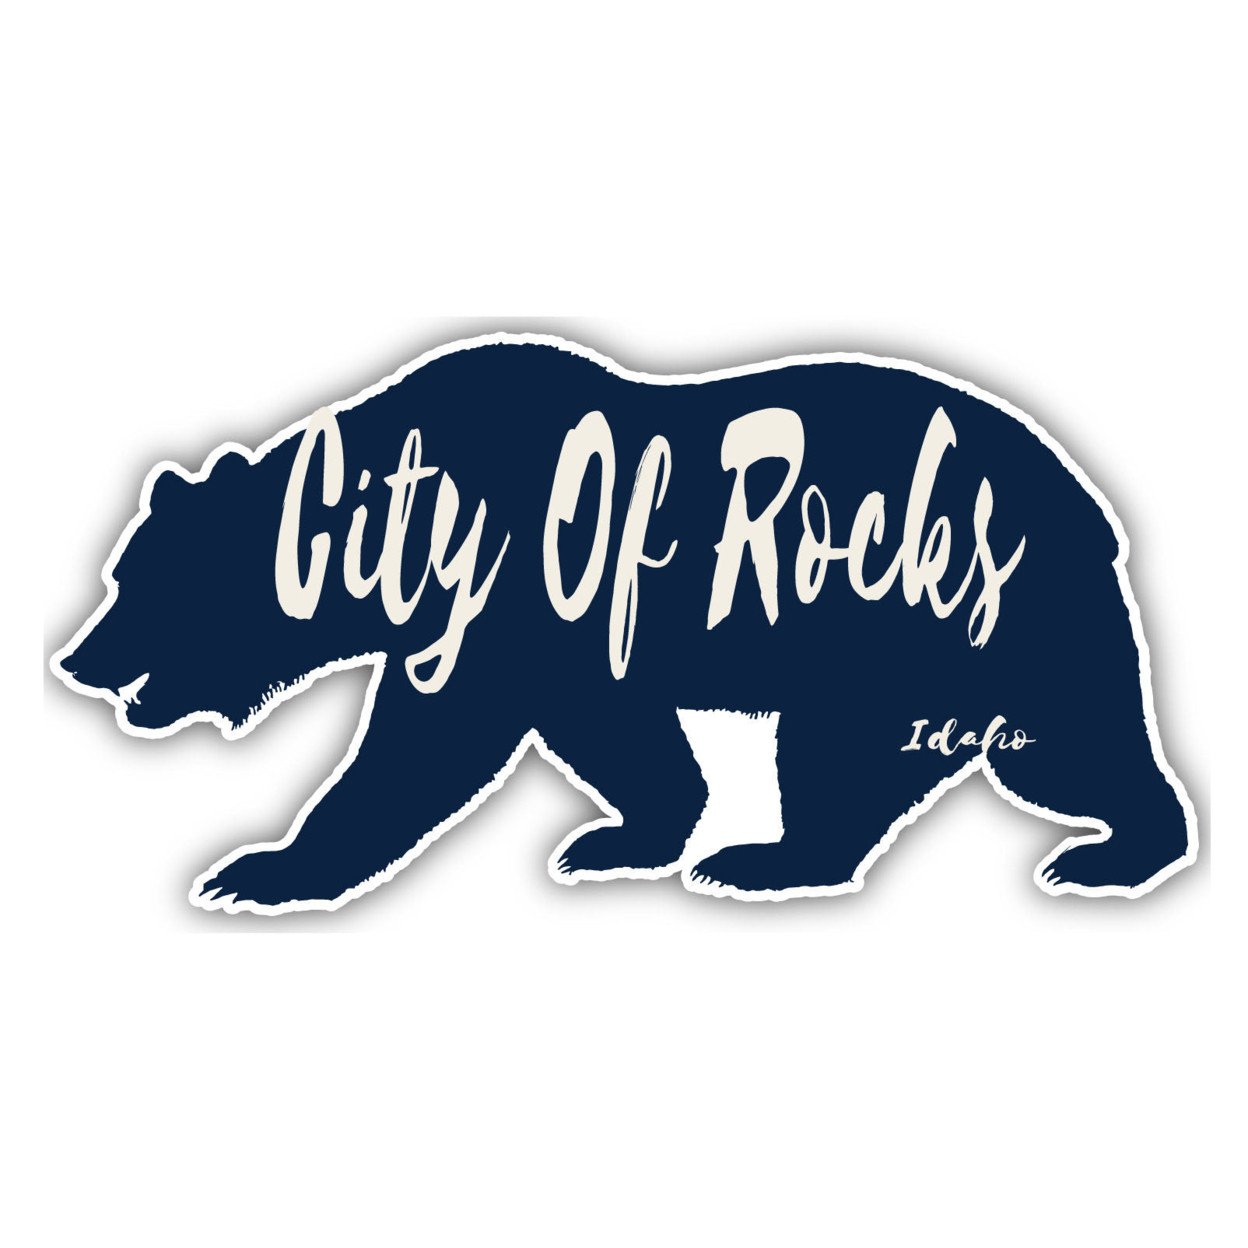 City Of Rocks Idaho Souvenir Decorative Stickers (Choose Theme And Size) - 4-Pack, 6-Inch, Tent